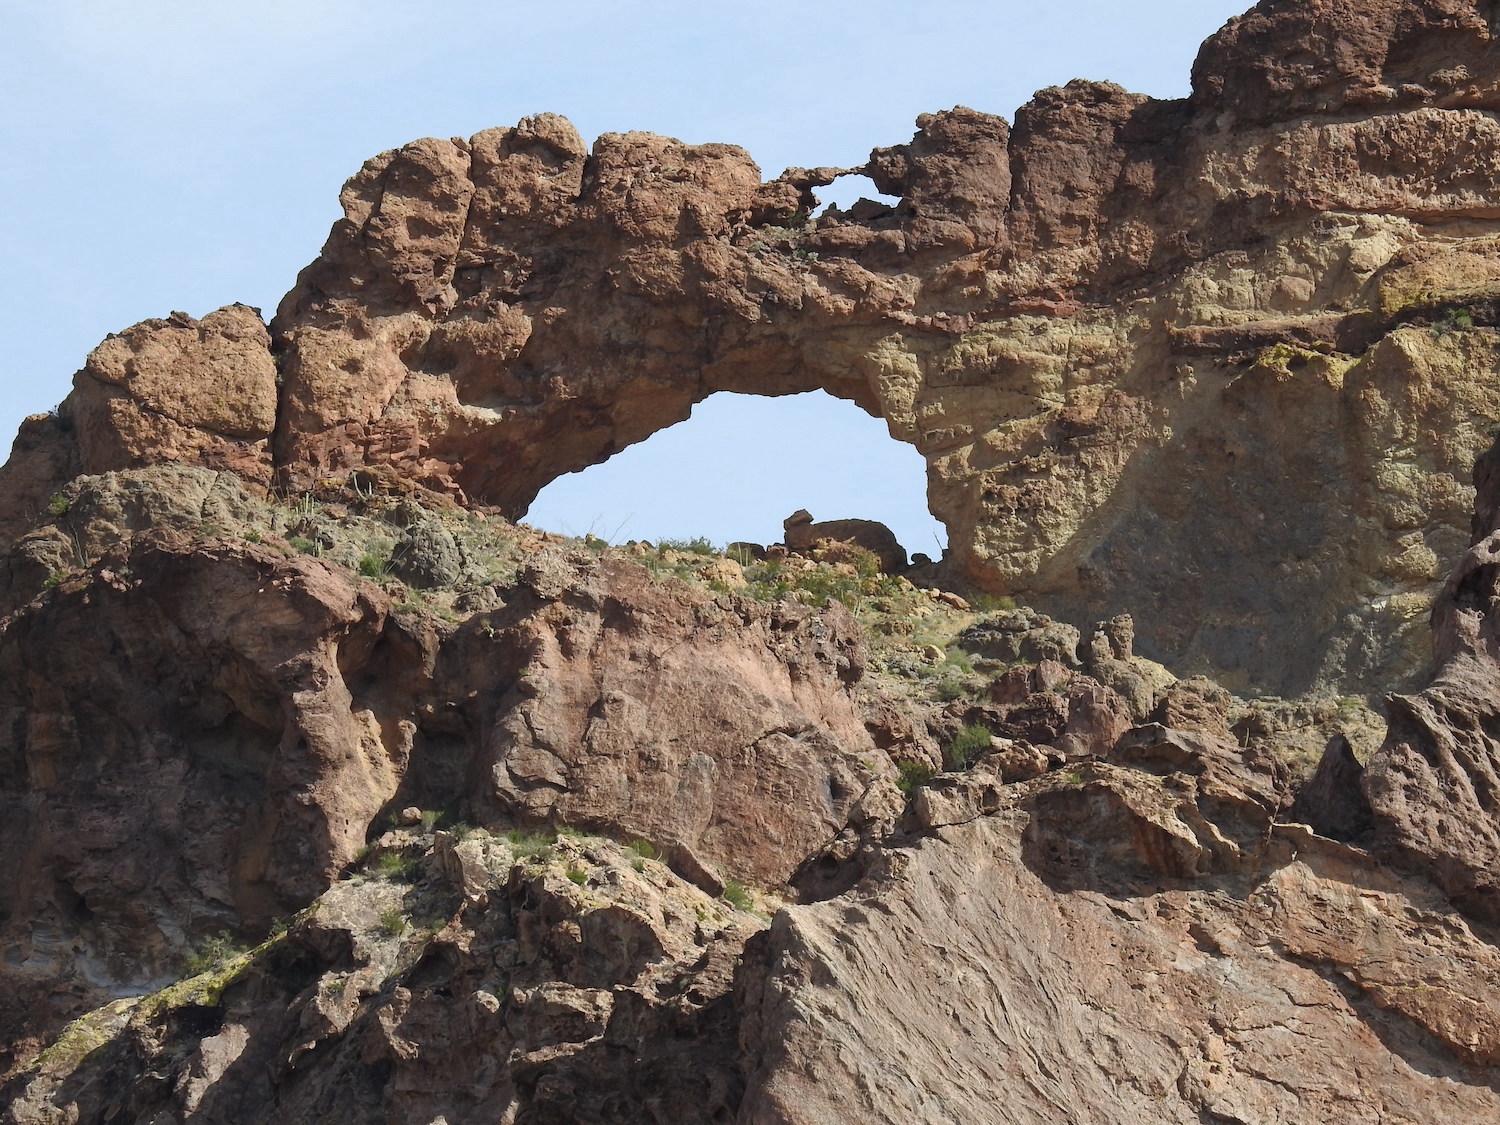 The famous double arch at Arch Canyon is visible from the trailhead parking lot.